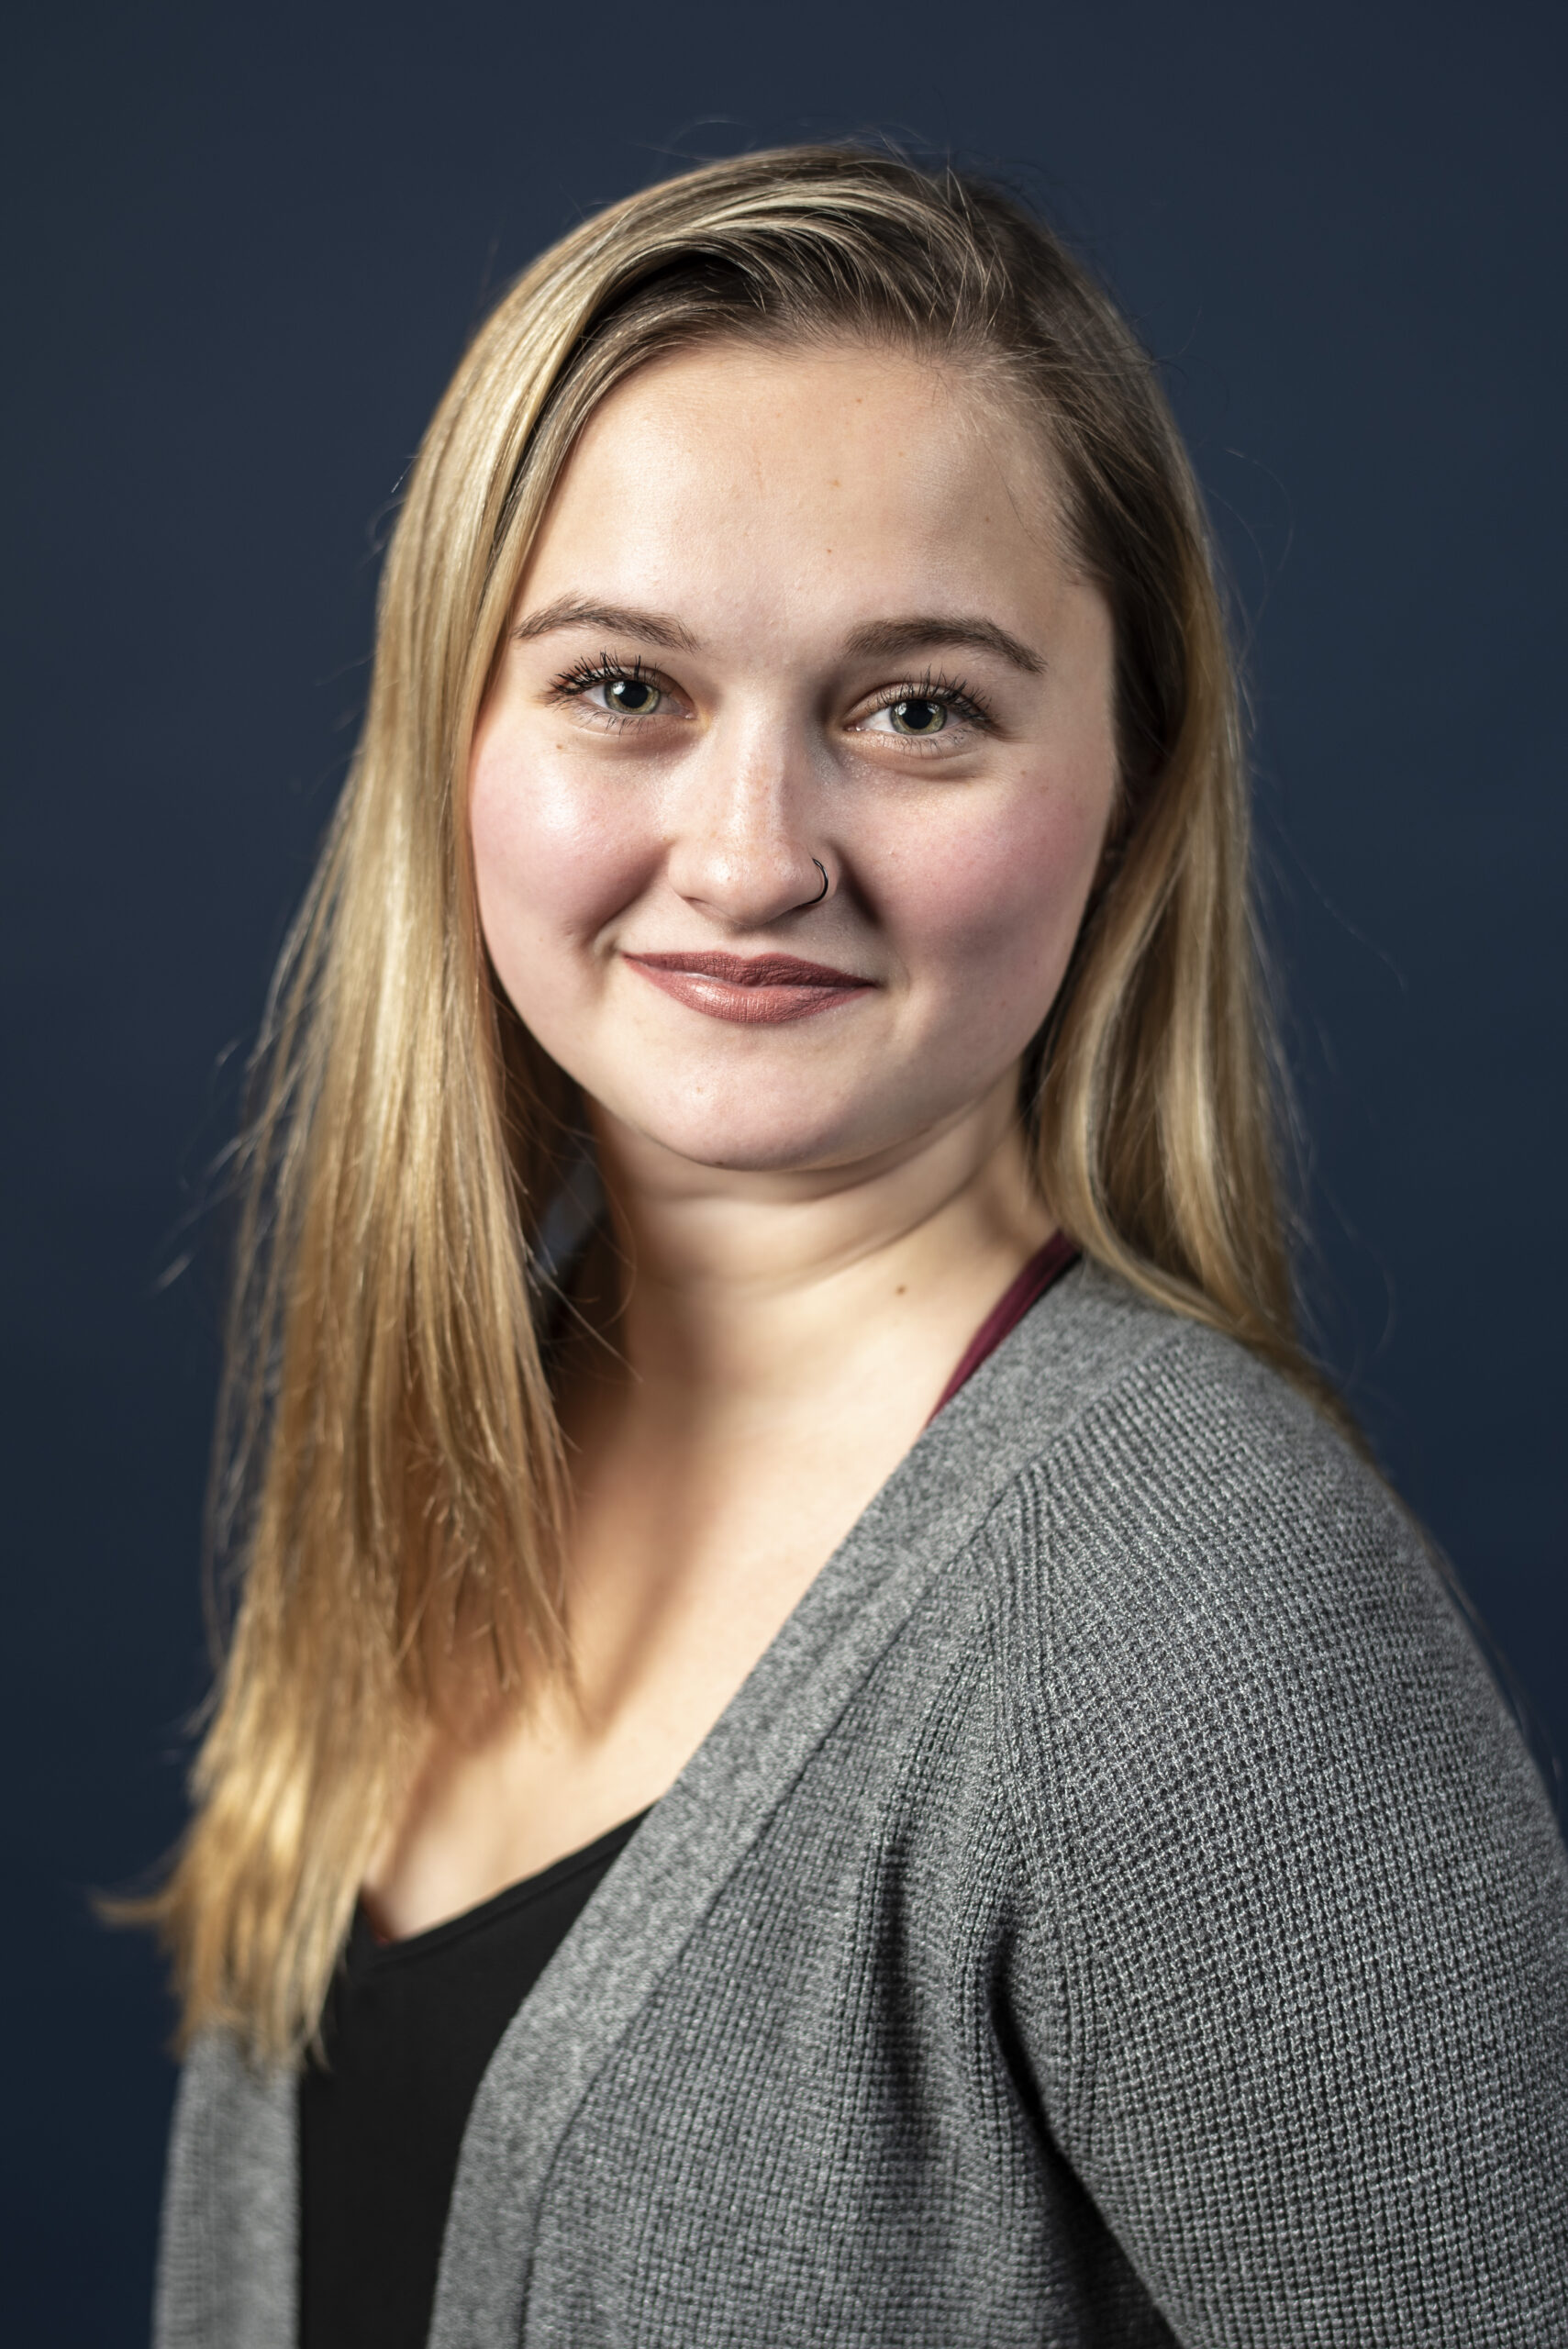 "All I can say is thank you so much for having faith in North Park Unversity and students like me. Without your generosity, I may not have been able to attend school. I am so appreciative that you have helped me further my education. " —Kajsa Johnsrud, Business and Economics, C’20